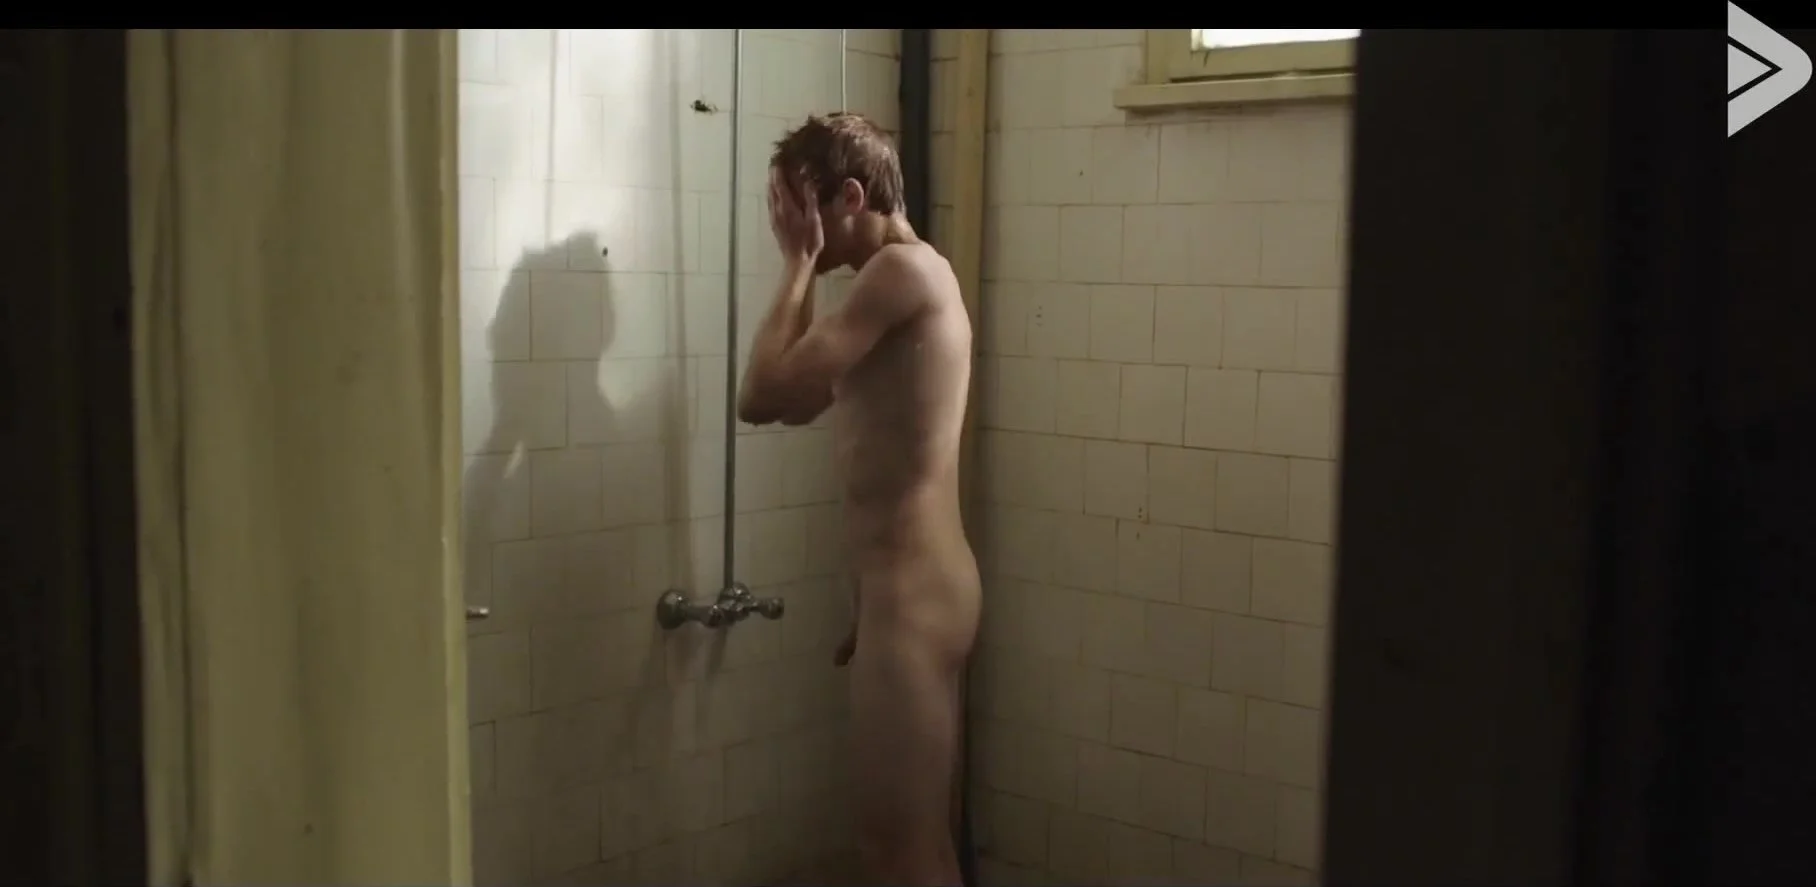 Male Celebs: Nude actor - video 2 - ThisVid.com